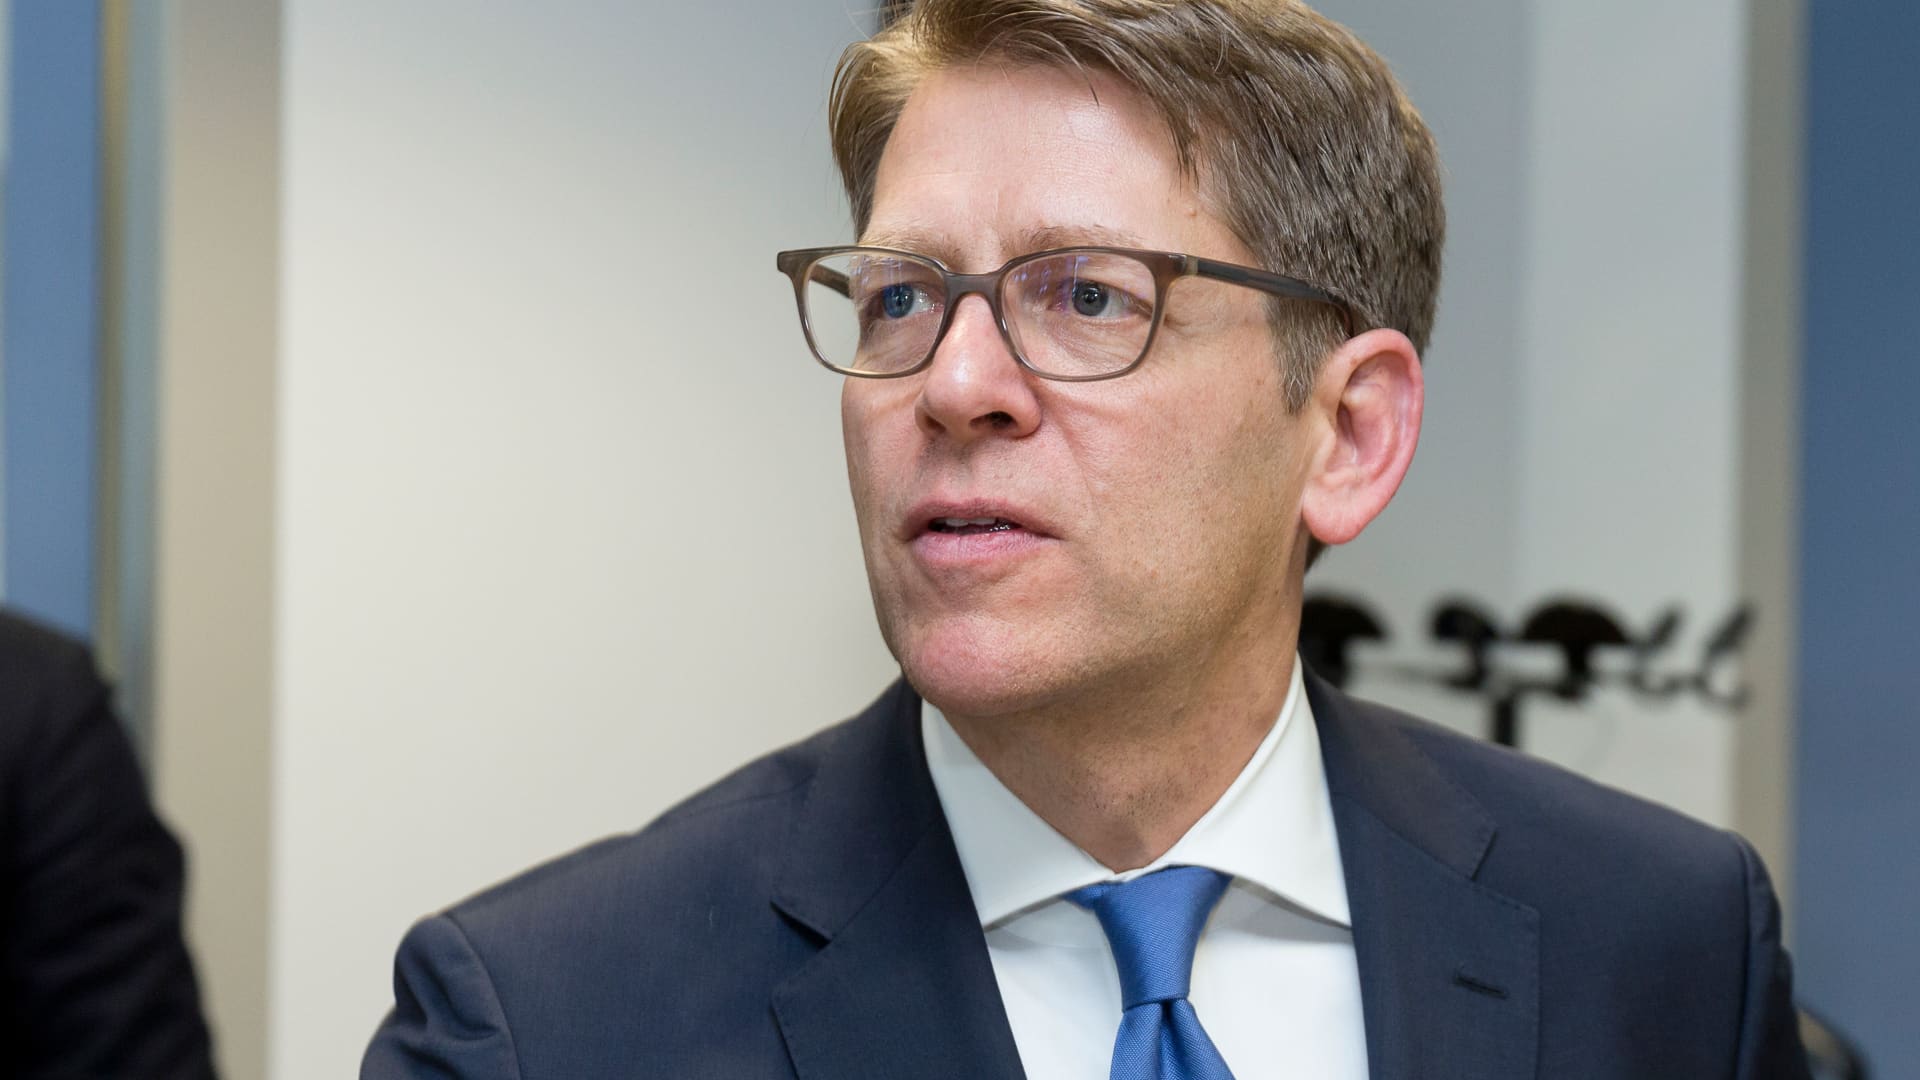 Amazon's PR and policy chief Jay Carney leaves to join Airbnb